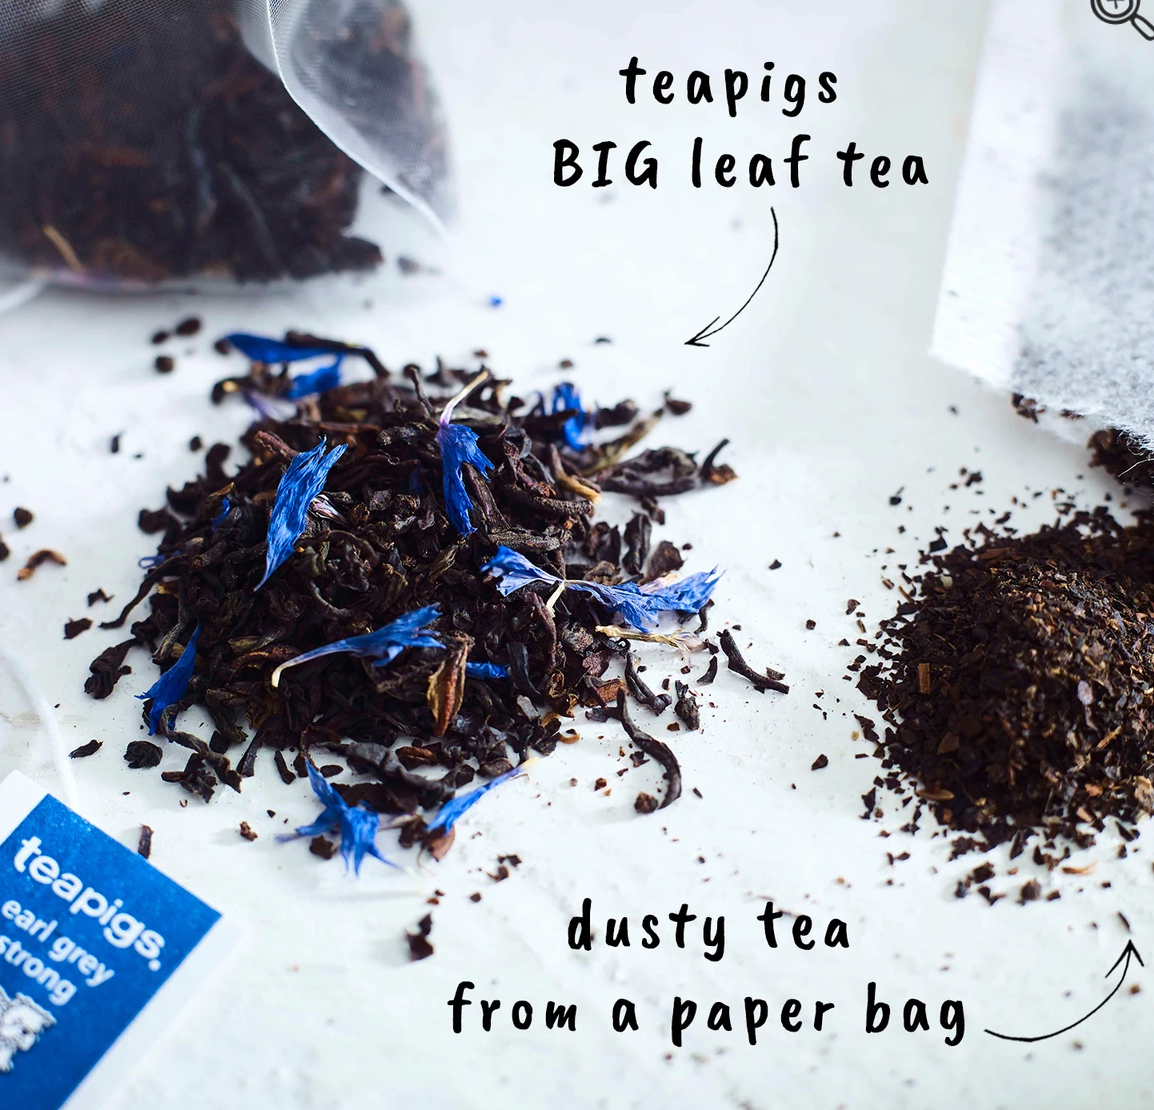 Pictured is two piles of loose tea. One is full leaves and the other is completely ground. There's an arrow and words pointing toward the big leaf ground tea "teapigs BIG leaf tea." The ground pile is labeled "dusty tea from a paper bag."